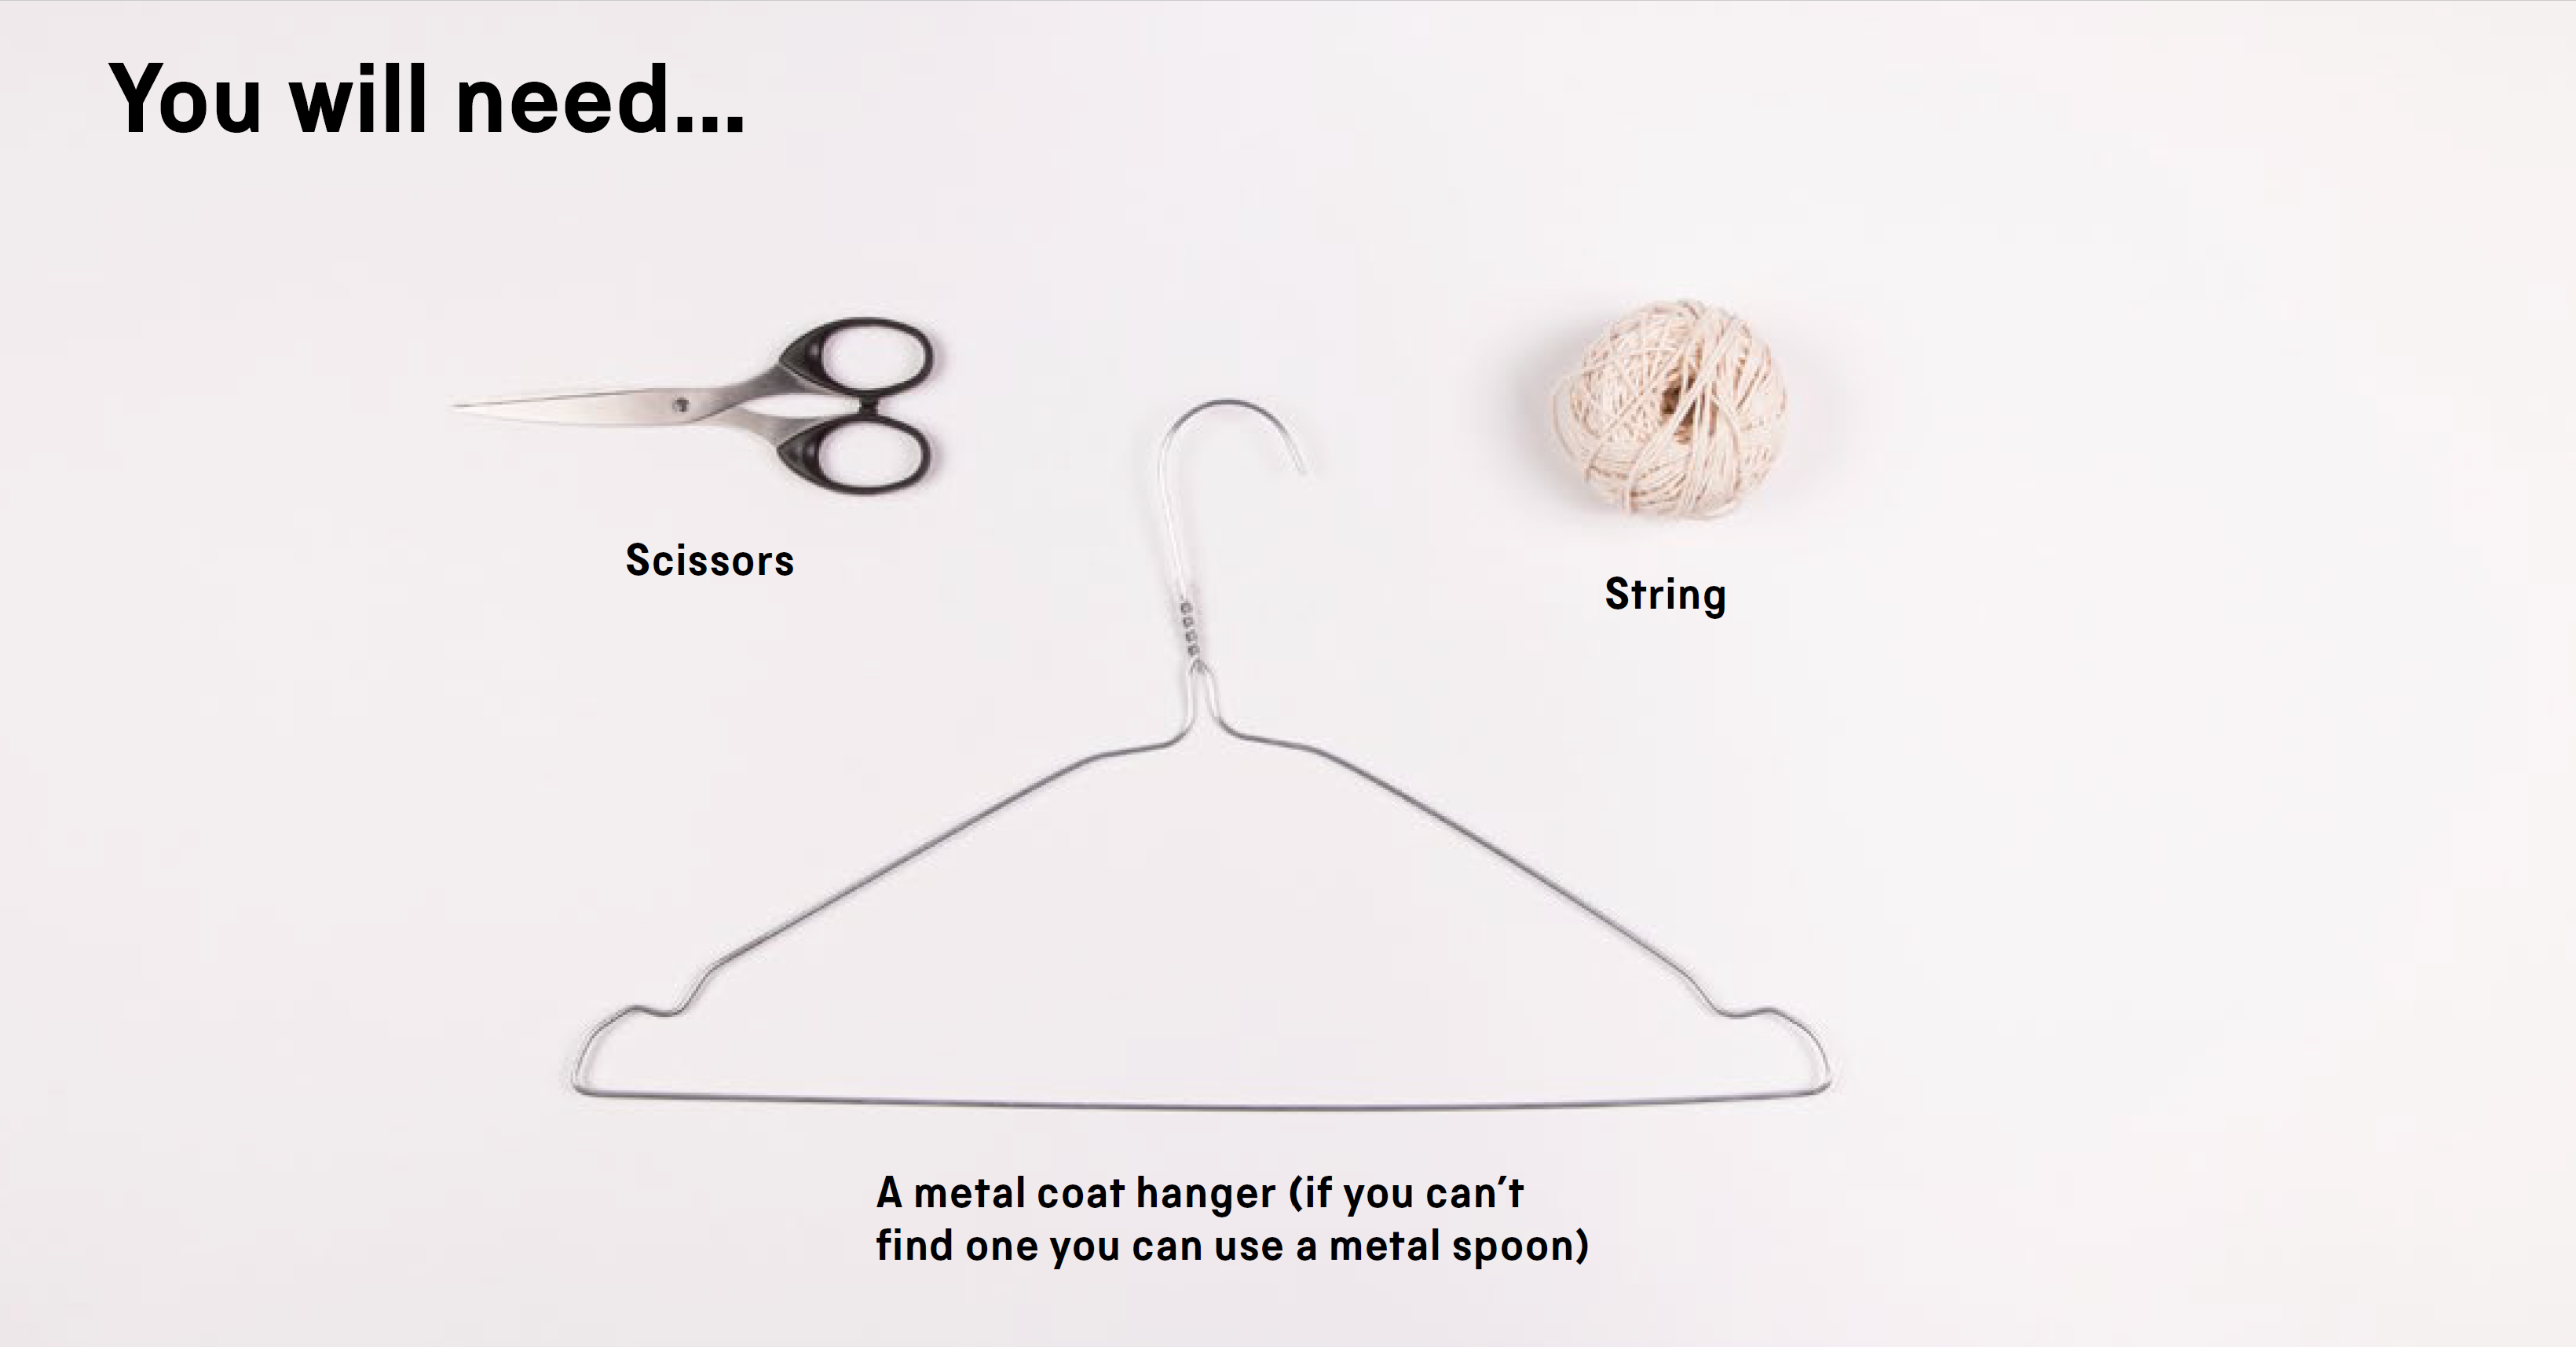 You will need: a metal coat hanger (if you can't find one you can use a metal spoon), scissors and string.